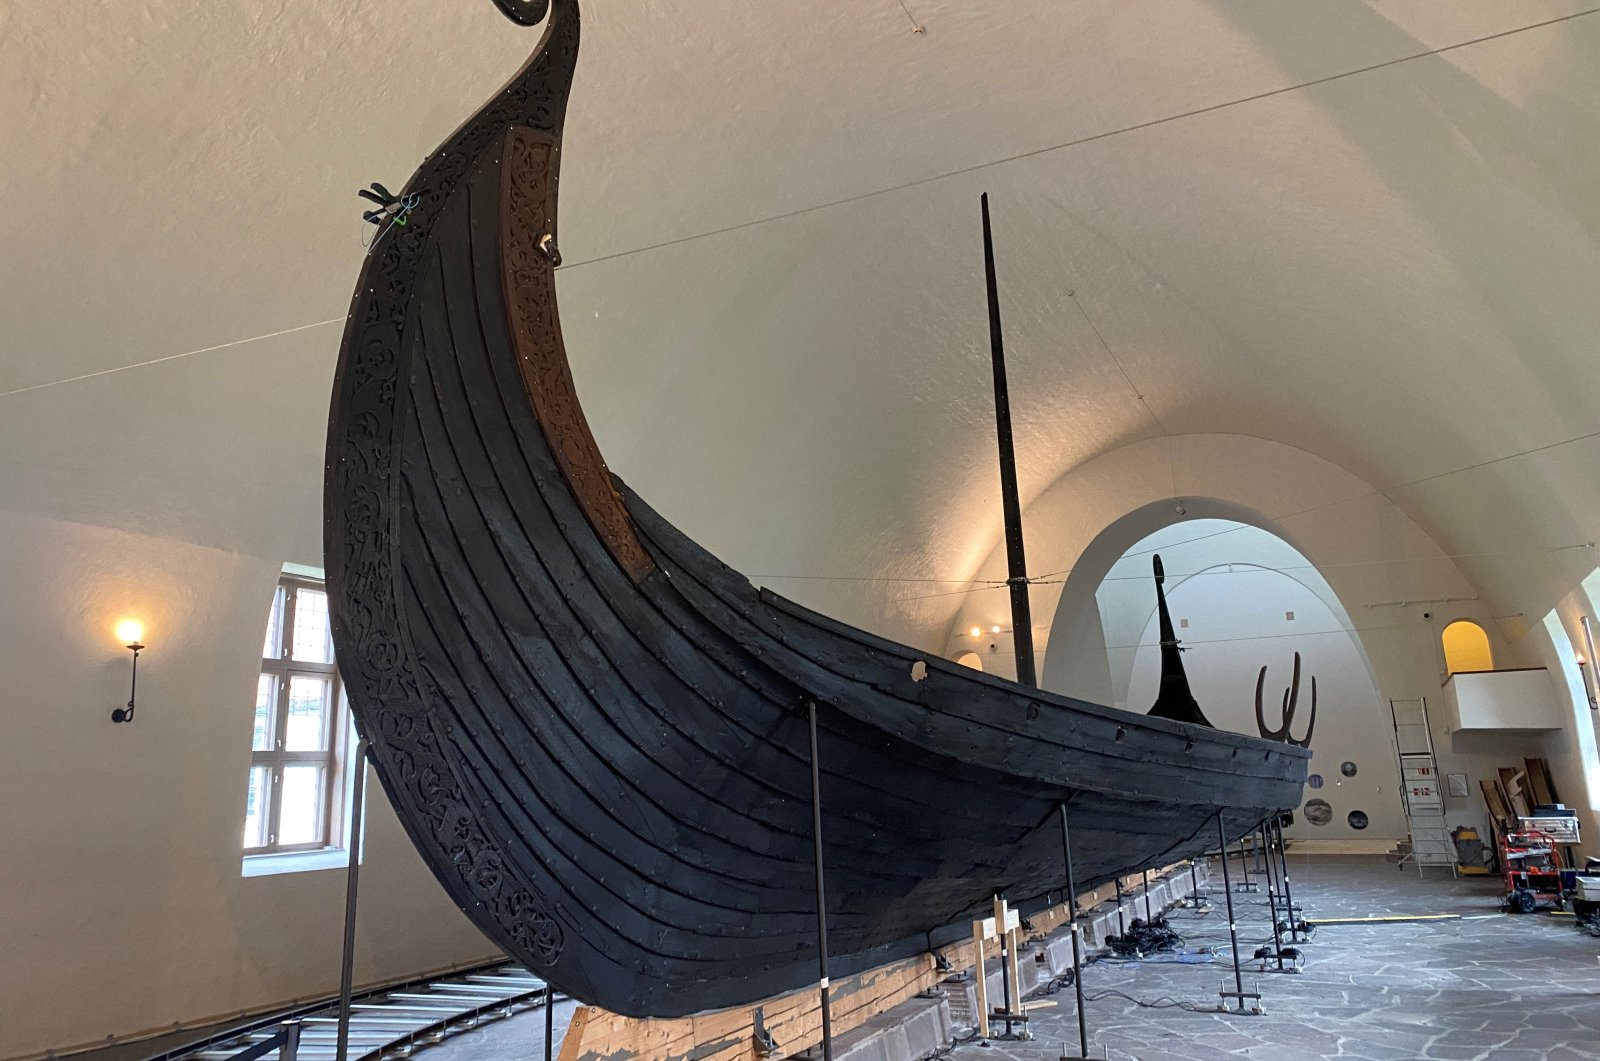 The Oseberg ship, built from oak, is placed inside The Viking Ship Museum, in Oslo, Norway, Sept. 12, 2022. (Reuters Photo)